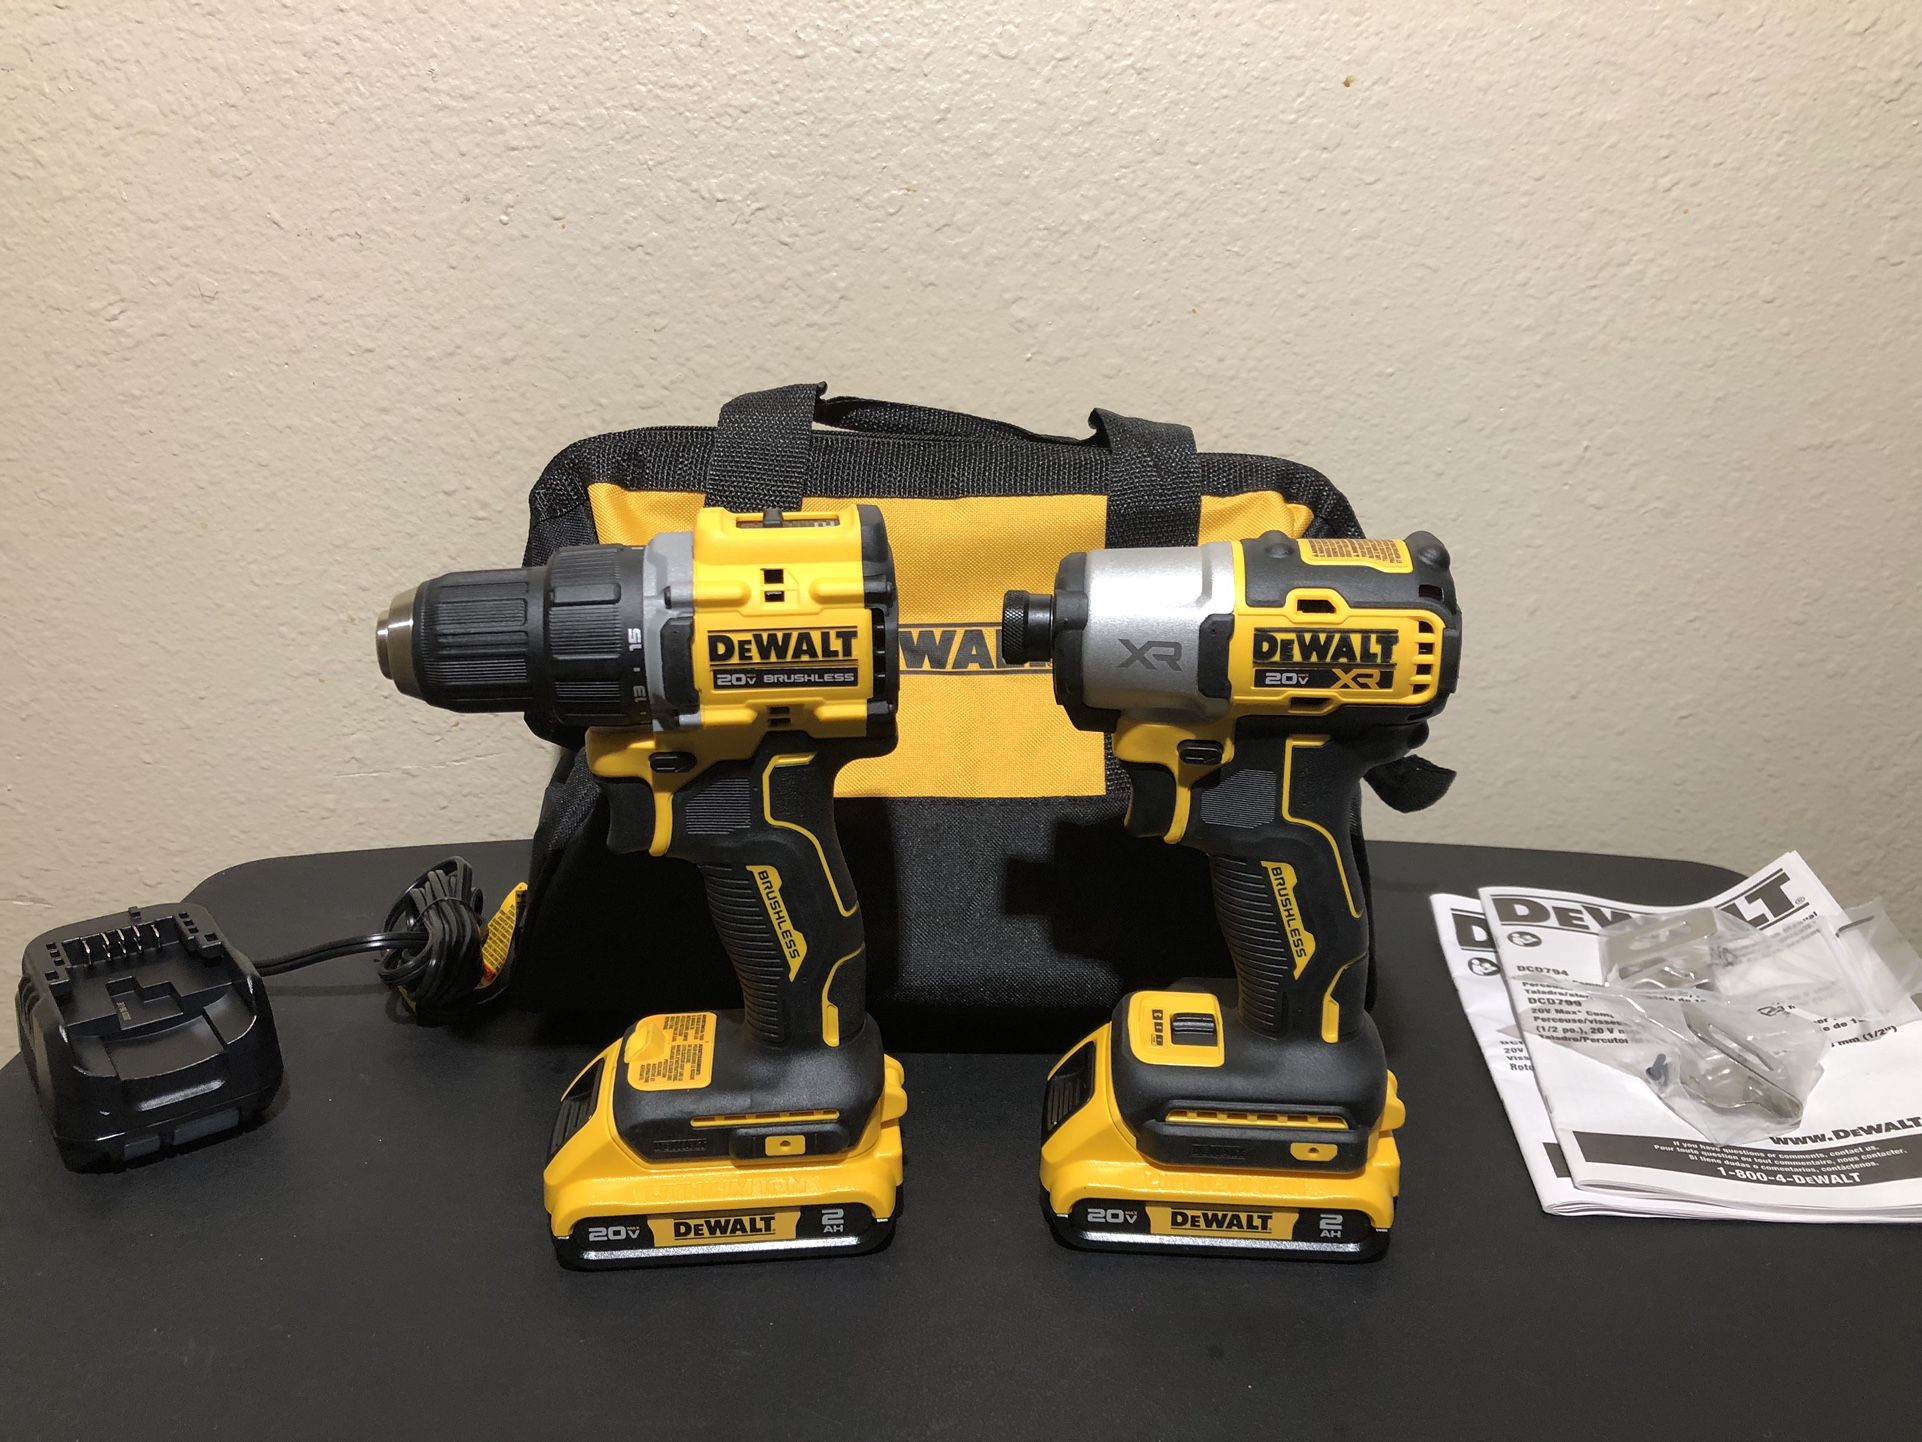 DEWALT 20V Atomic Drill and Max Xr Impact Driver 2 Tool Cordless Combo Kit with (2) 2.0Ah Batteries, Charger, and Bag